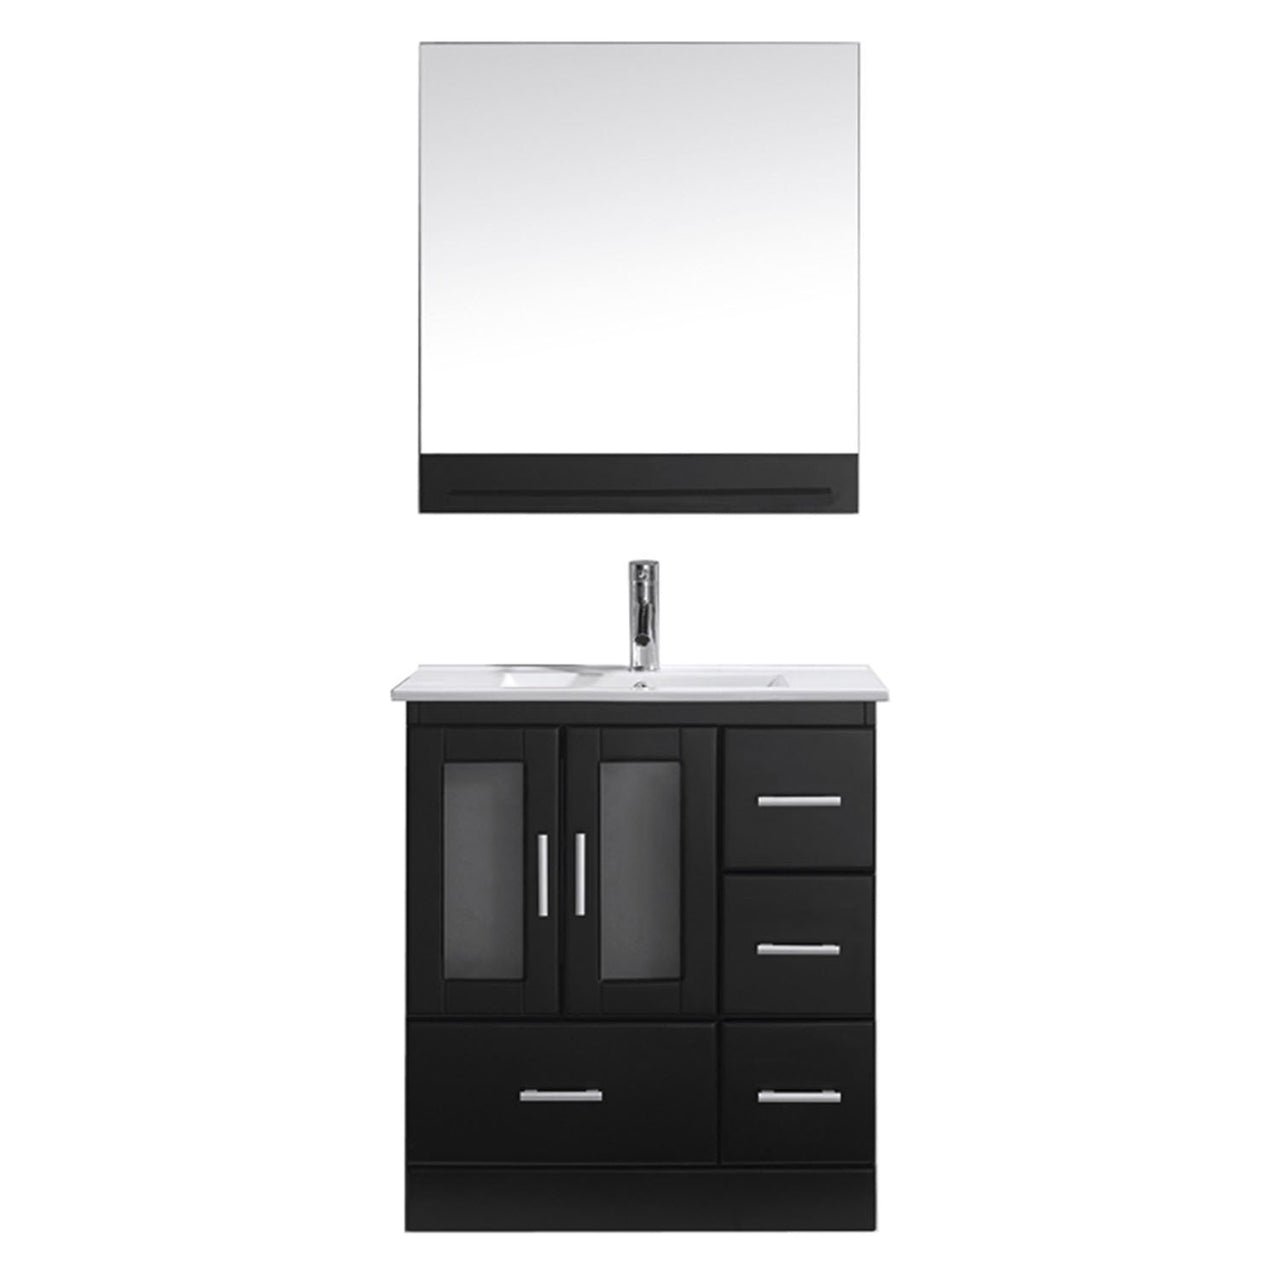 Virtu USA Zola 30" Single Square Sink Espresso Top Vanity in Espresso with Polished Chrome Faucet and Mirror Vanity Virtu USA 